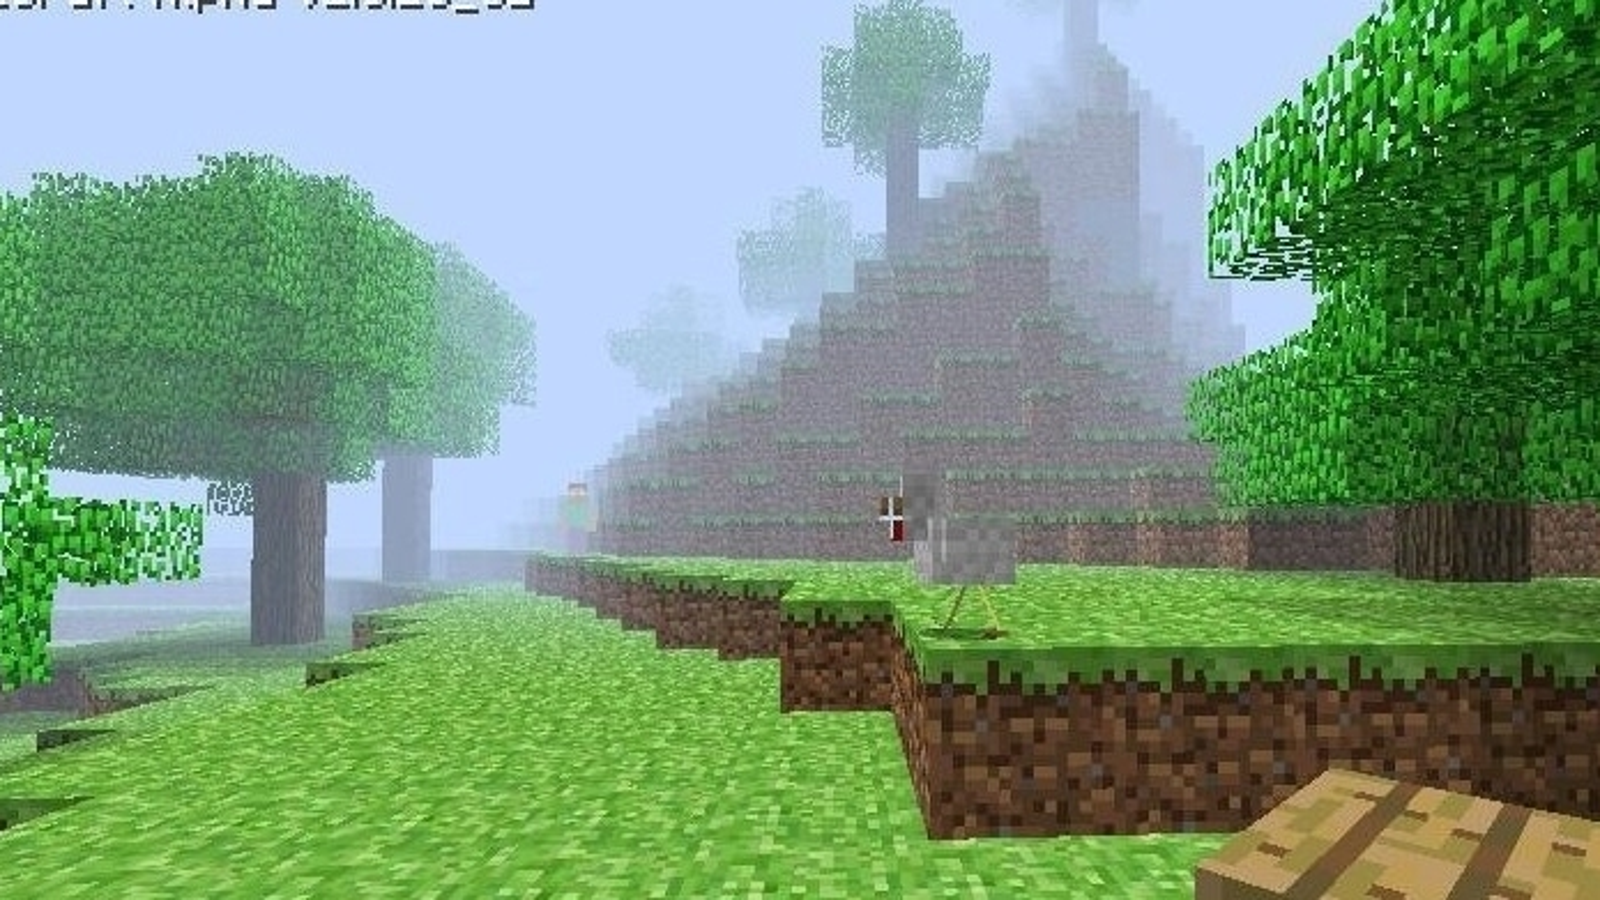 Can Herobrine be seen in Minecraft?